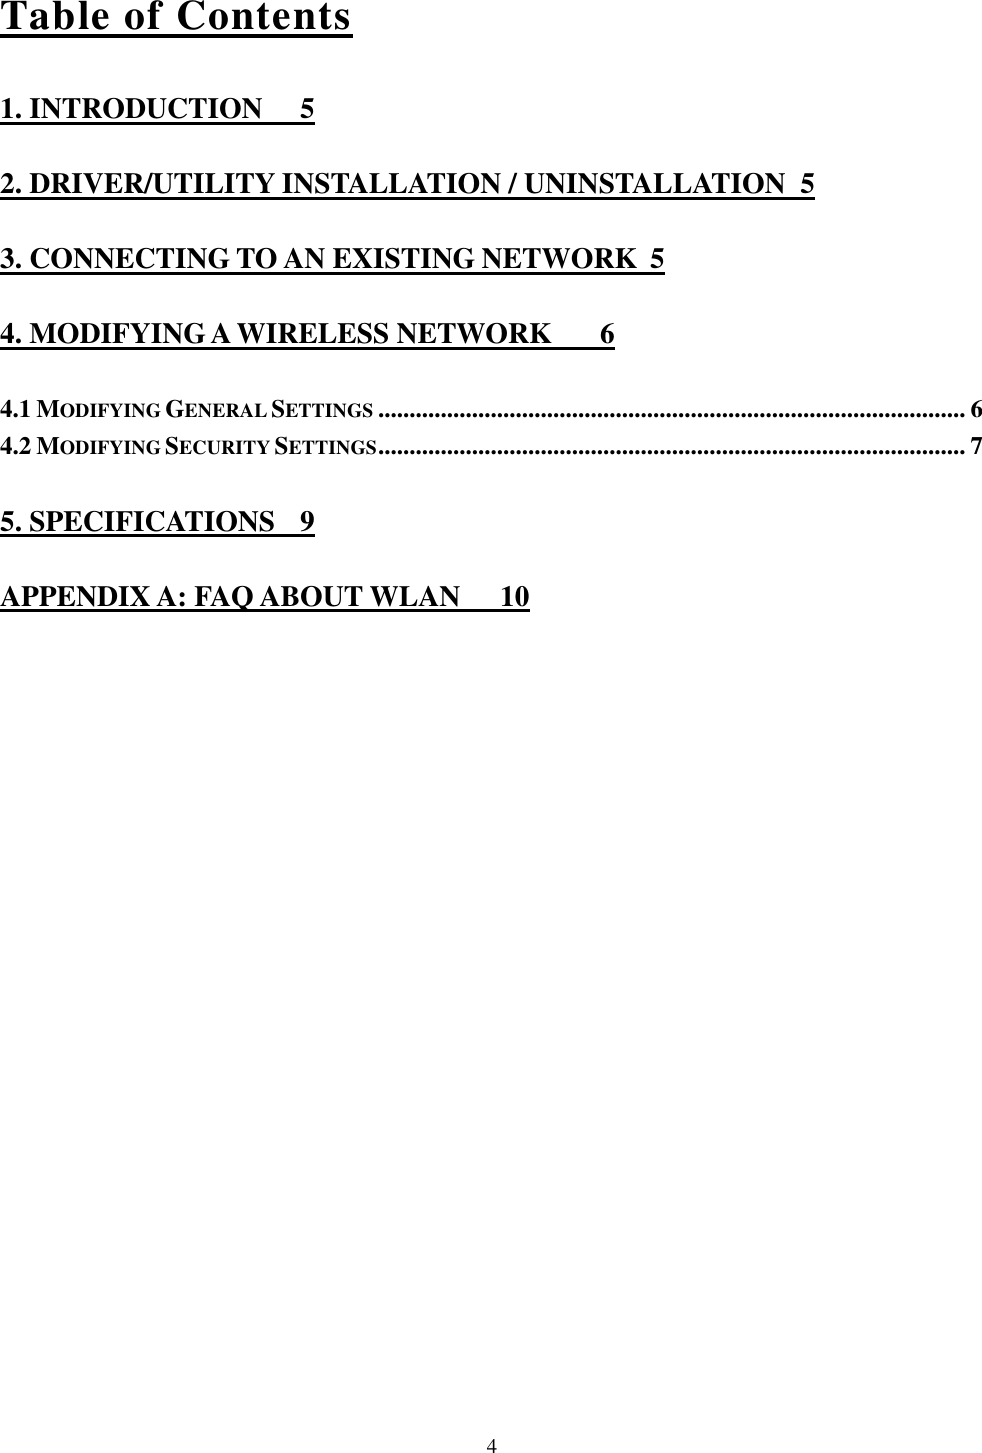   4 Table of Contents 1. INTRODUCTION  5 2. DRIVER/UTILITY INSTALLATION / UNINSTALLATION  5 3. CONNECTING TO AN EXISTING NETWORK  5 4. MODIFYING A WIRELESS NETWORK  6 4.1 MODIFYING GENERAL SETTINGS.............................................................................................. 6 4.2 MODIFYING SECURITY SETTINGS.............................................................................................. 7 5. SPECIFICATIONS  9 APPENDIX A: FAQ ABOUT WLAN  10 